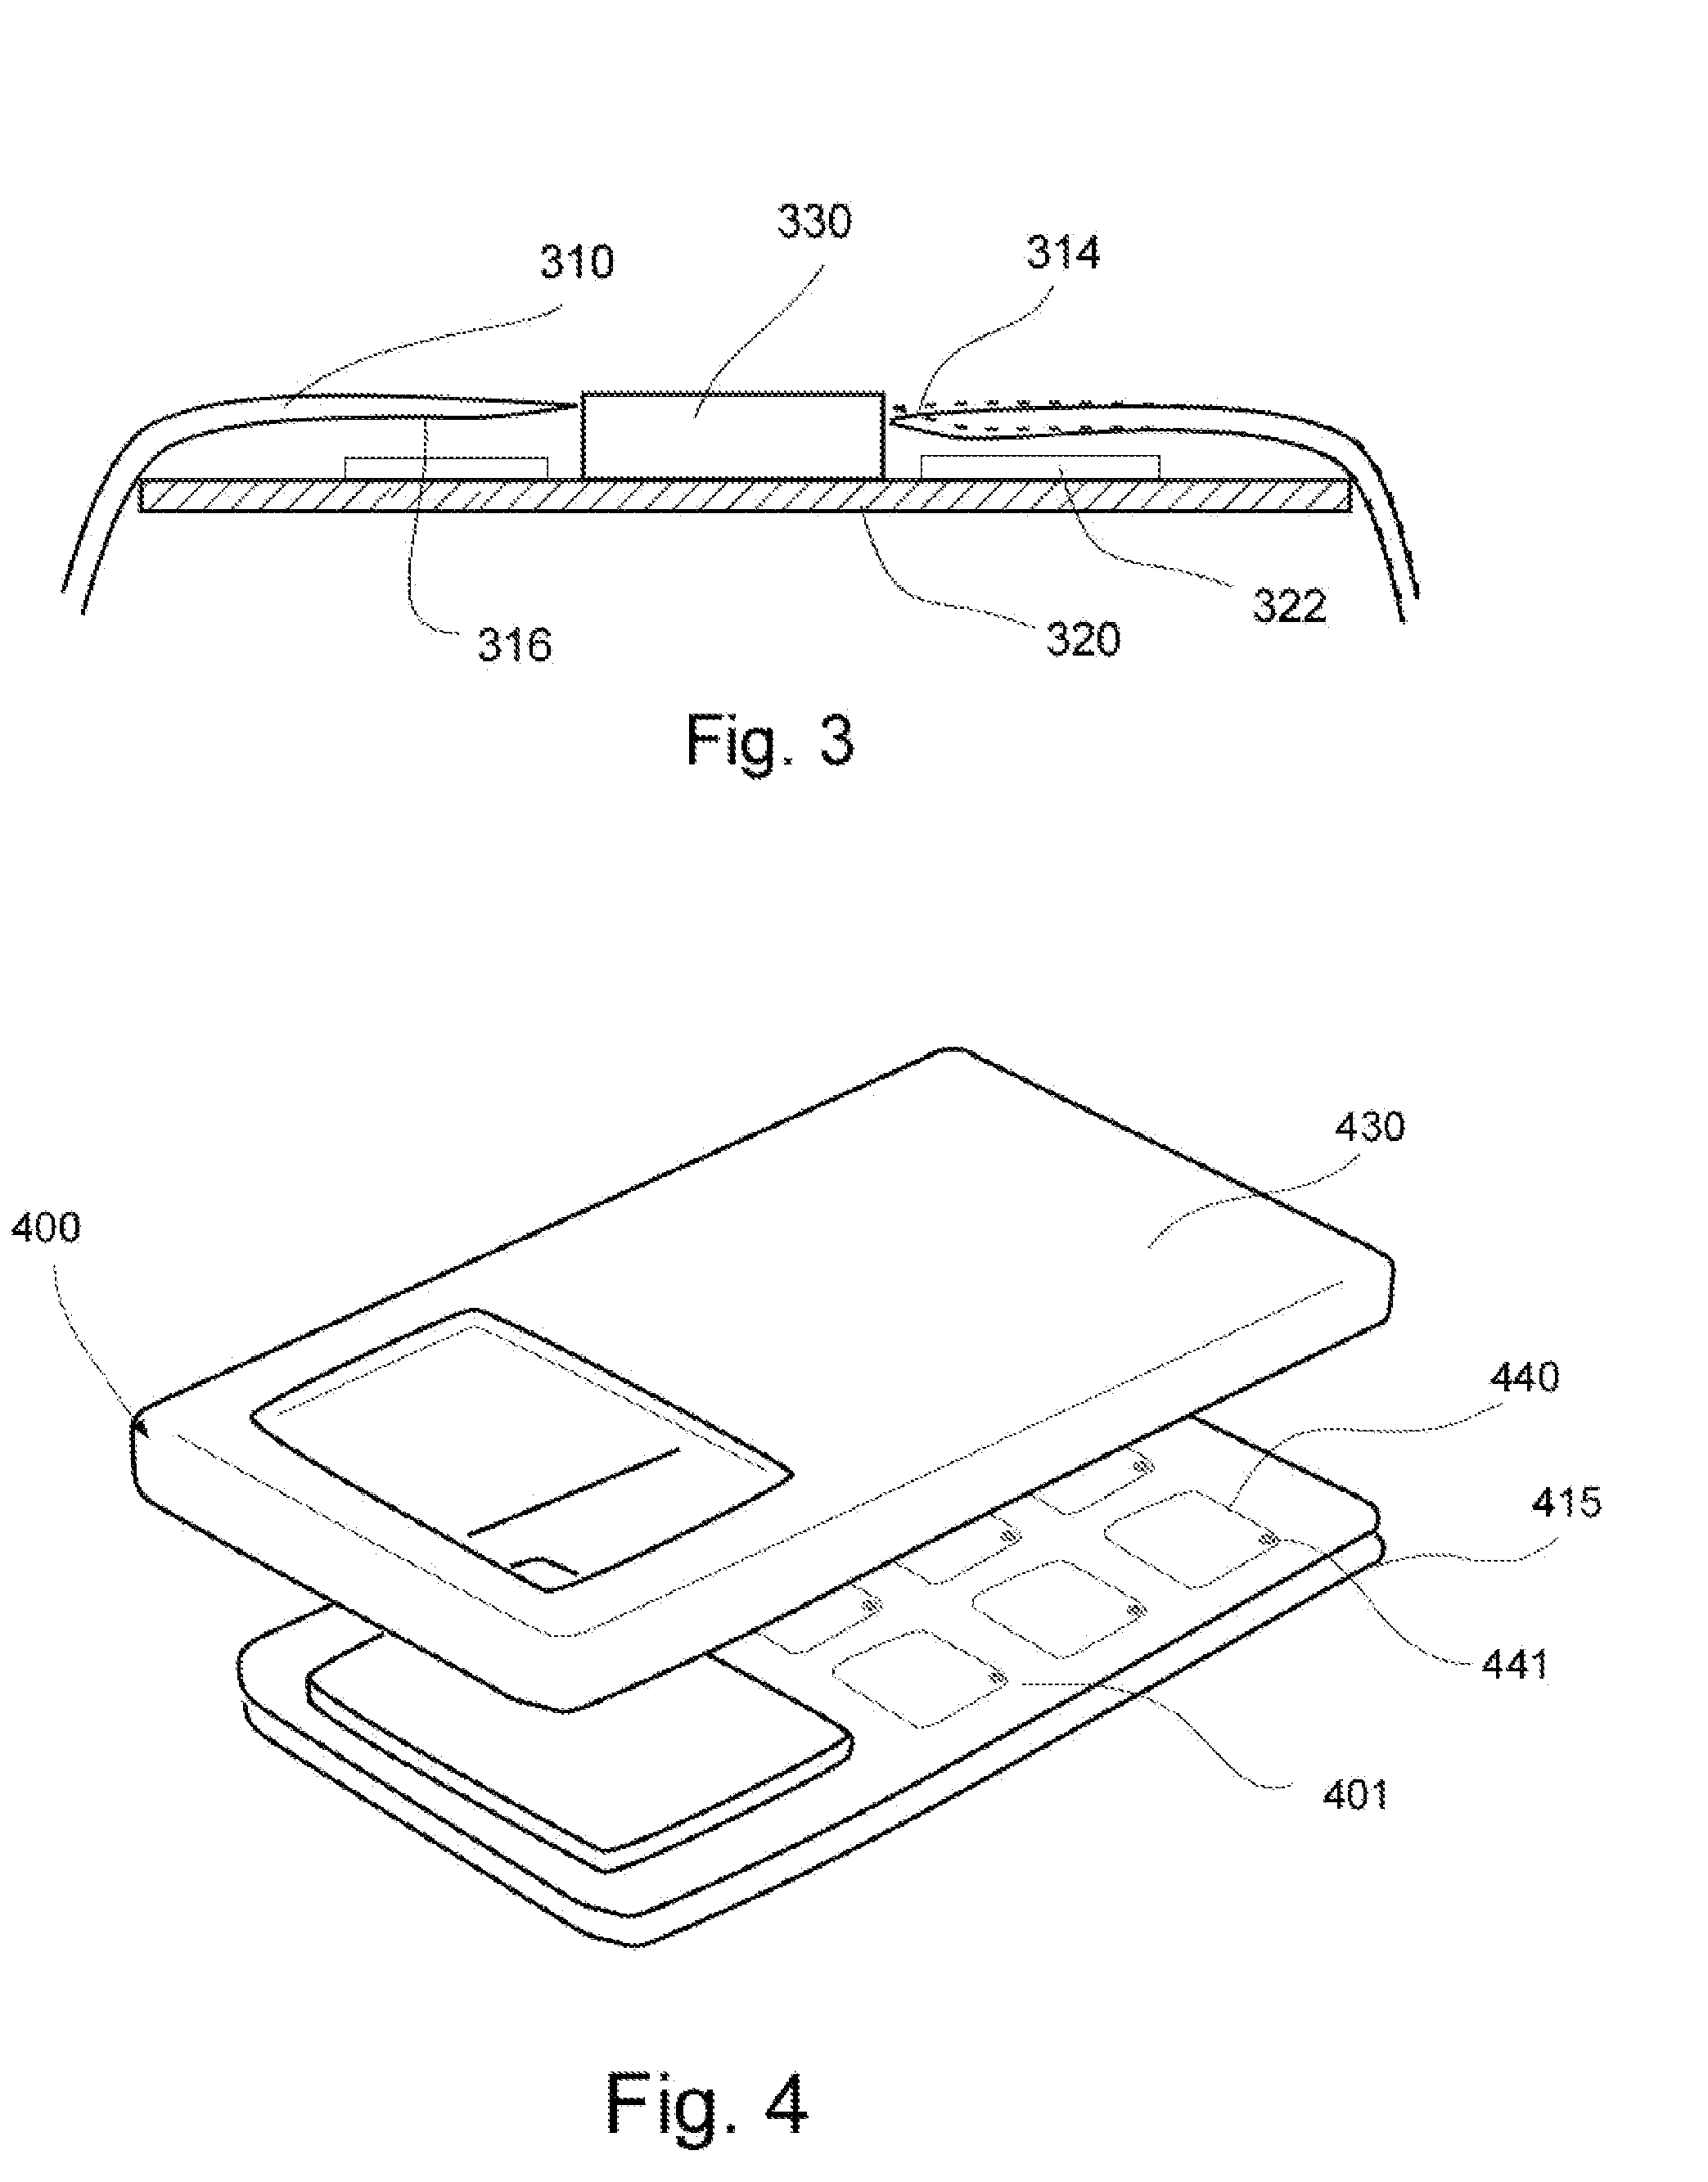 Electronic device housing with integrated user input capability